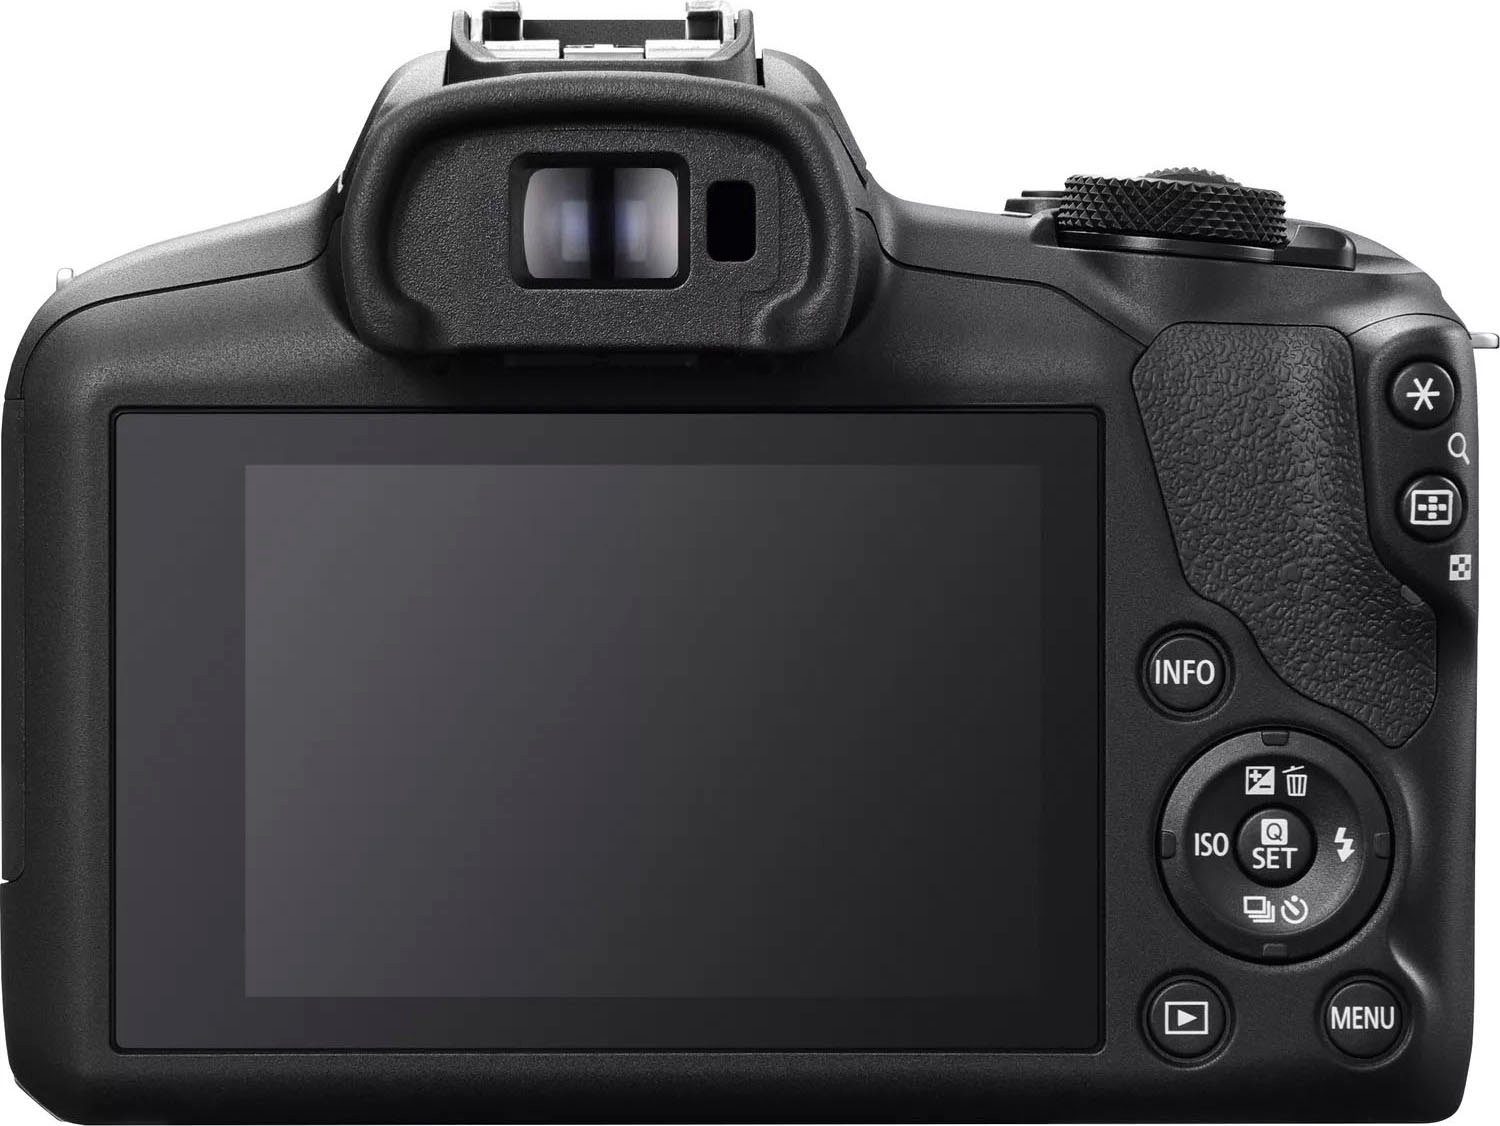 Canon EOS R100 + RF-S STM F4.5-6.3 STM, Kit Bluetooth, 24,1 (RF-S 18-45mm IS IS 18-45mm MP, F4.5-6.3 WLAN) Systemkamera